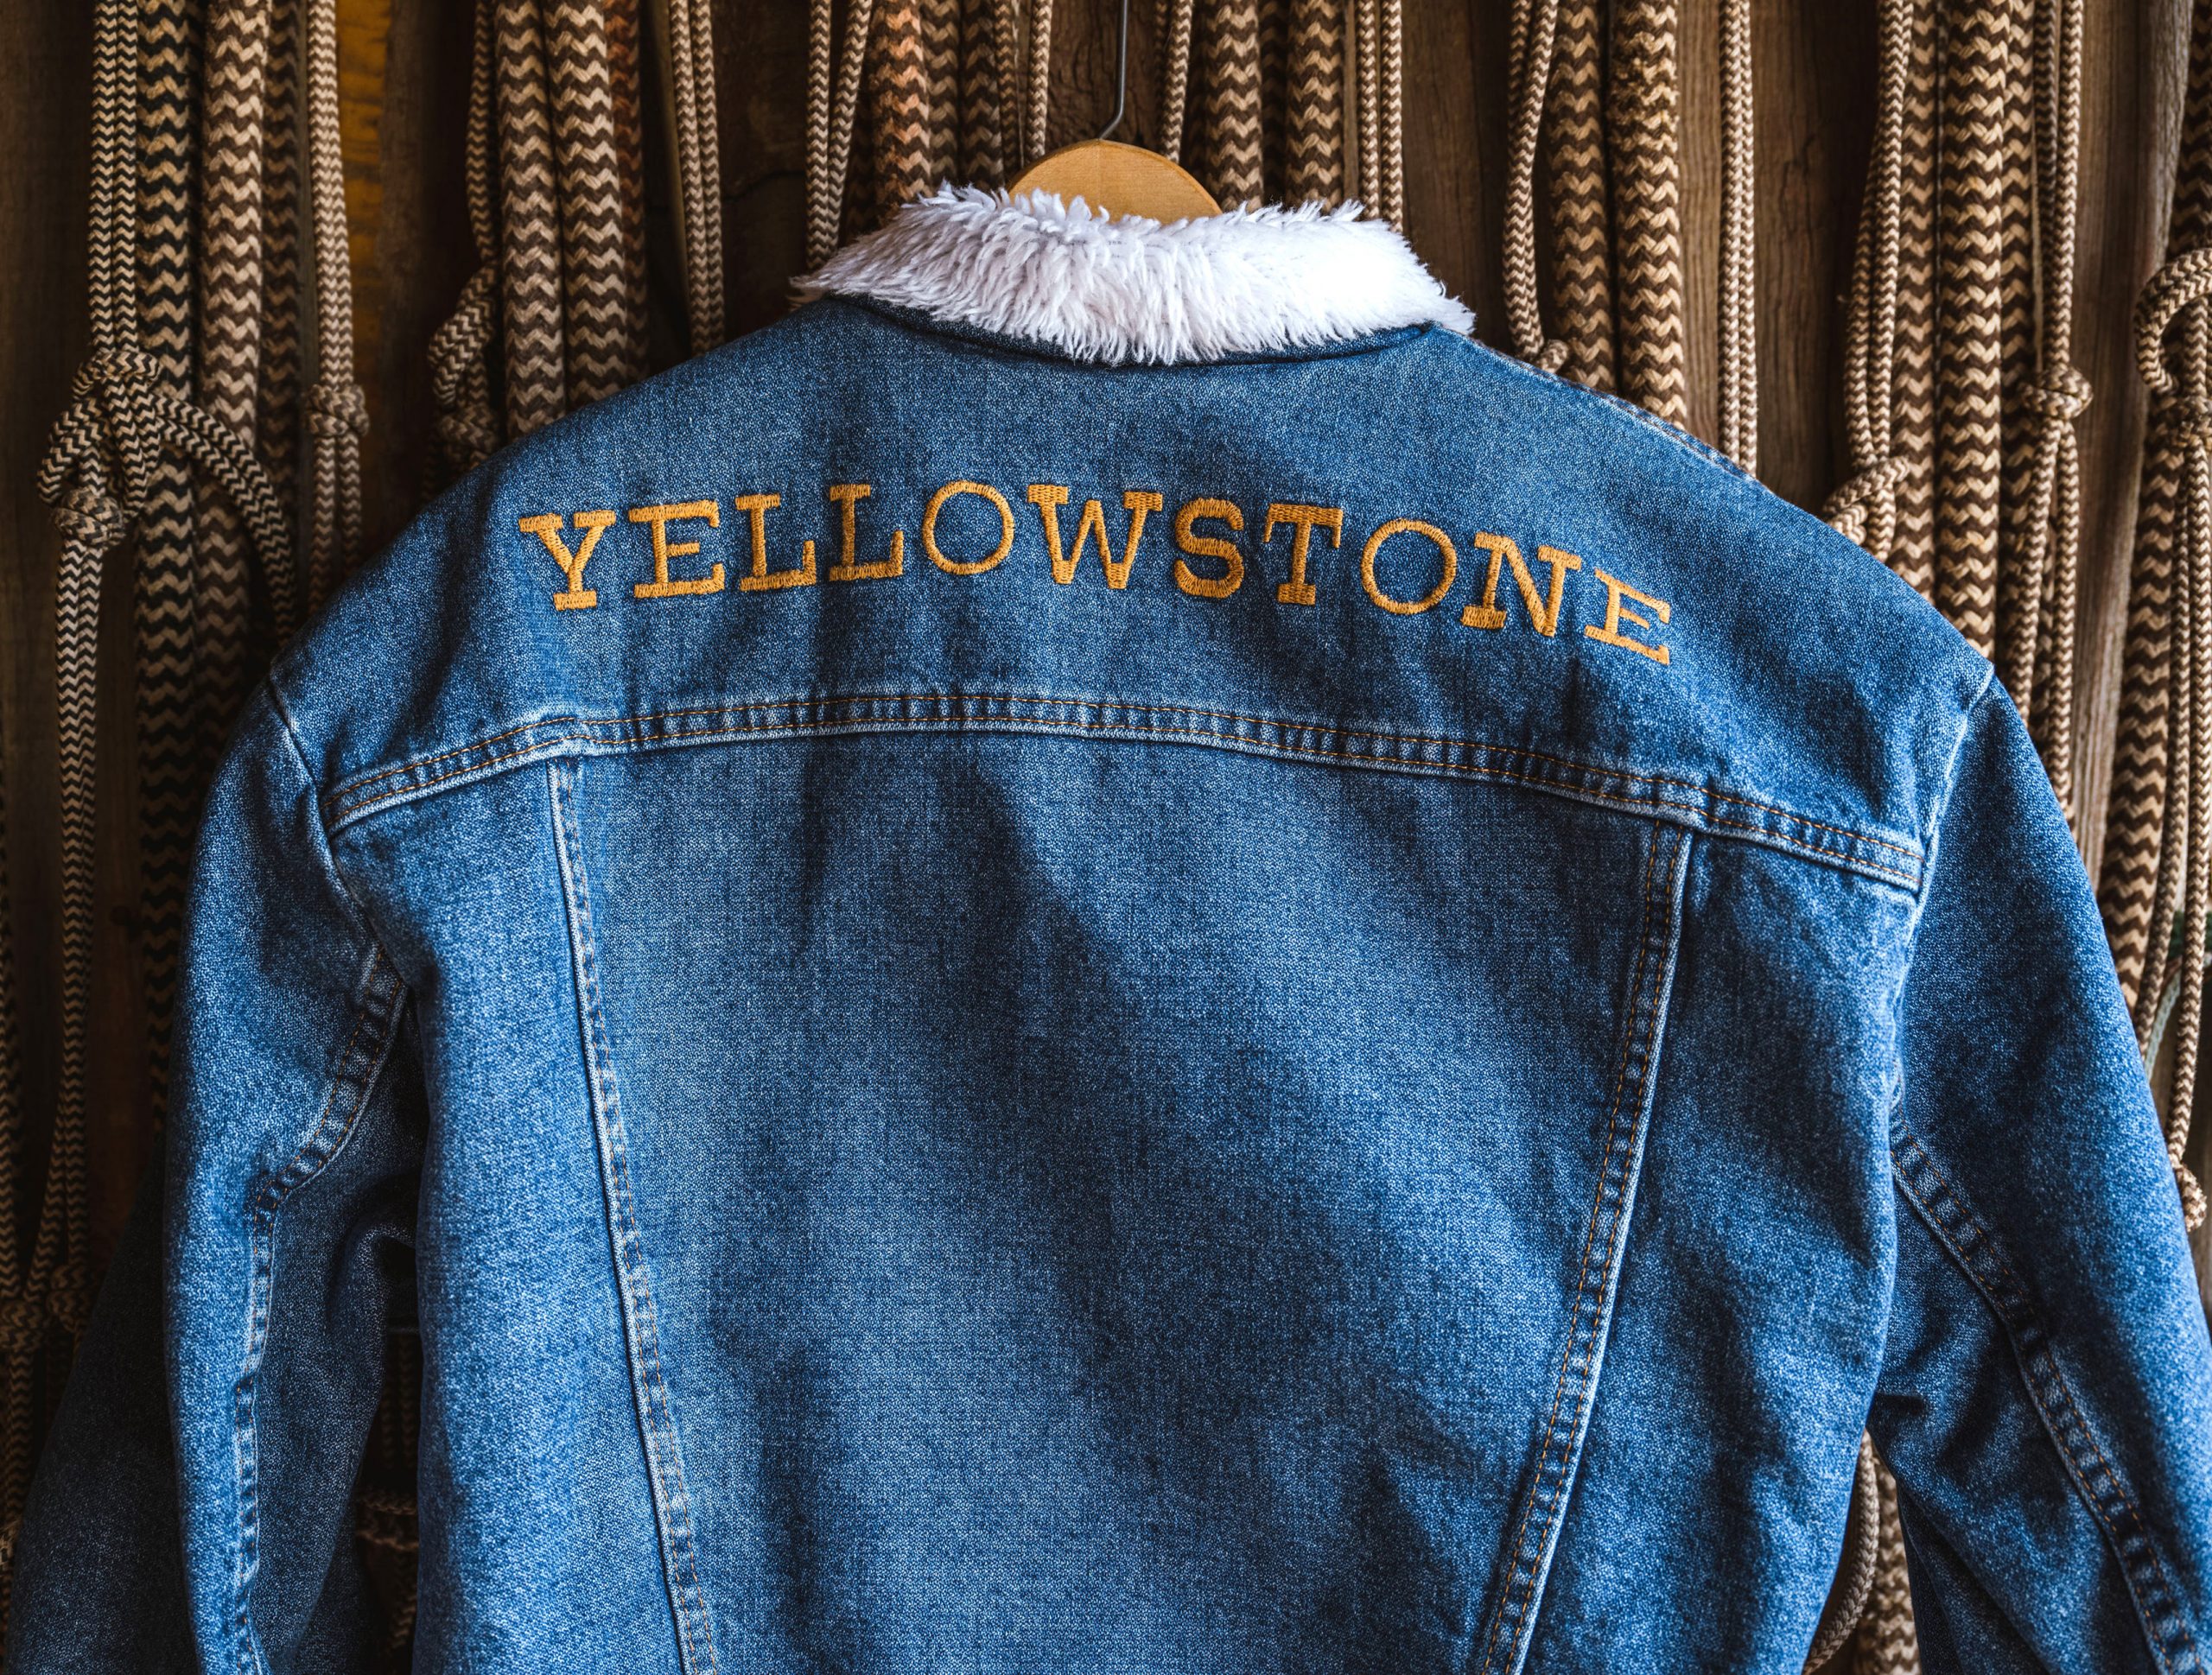 Dress Like A Dutton With The Wrangler x Yellowstone Collection